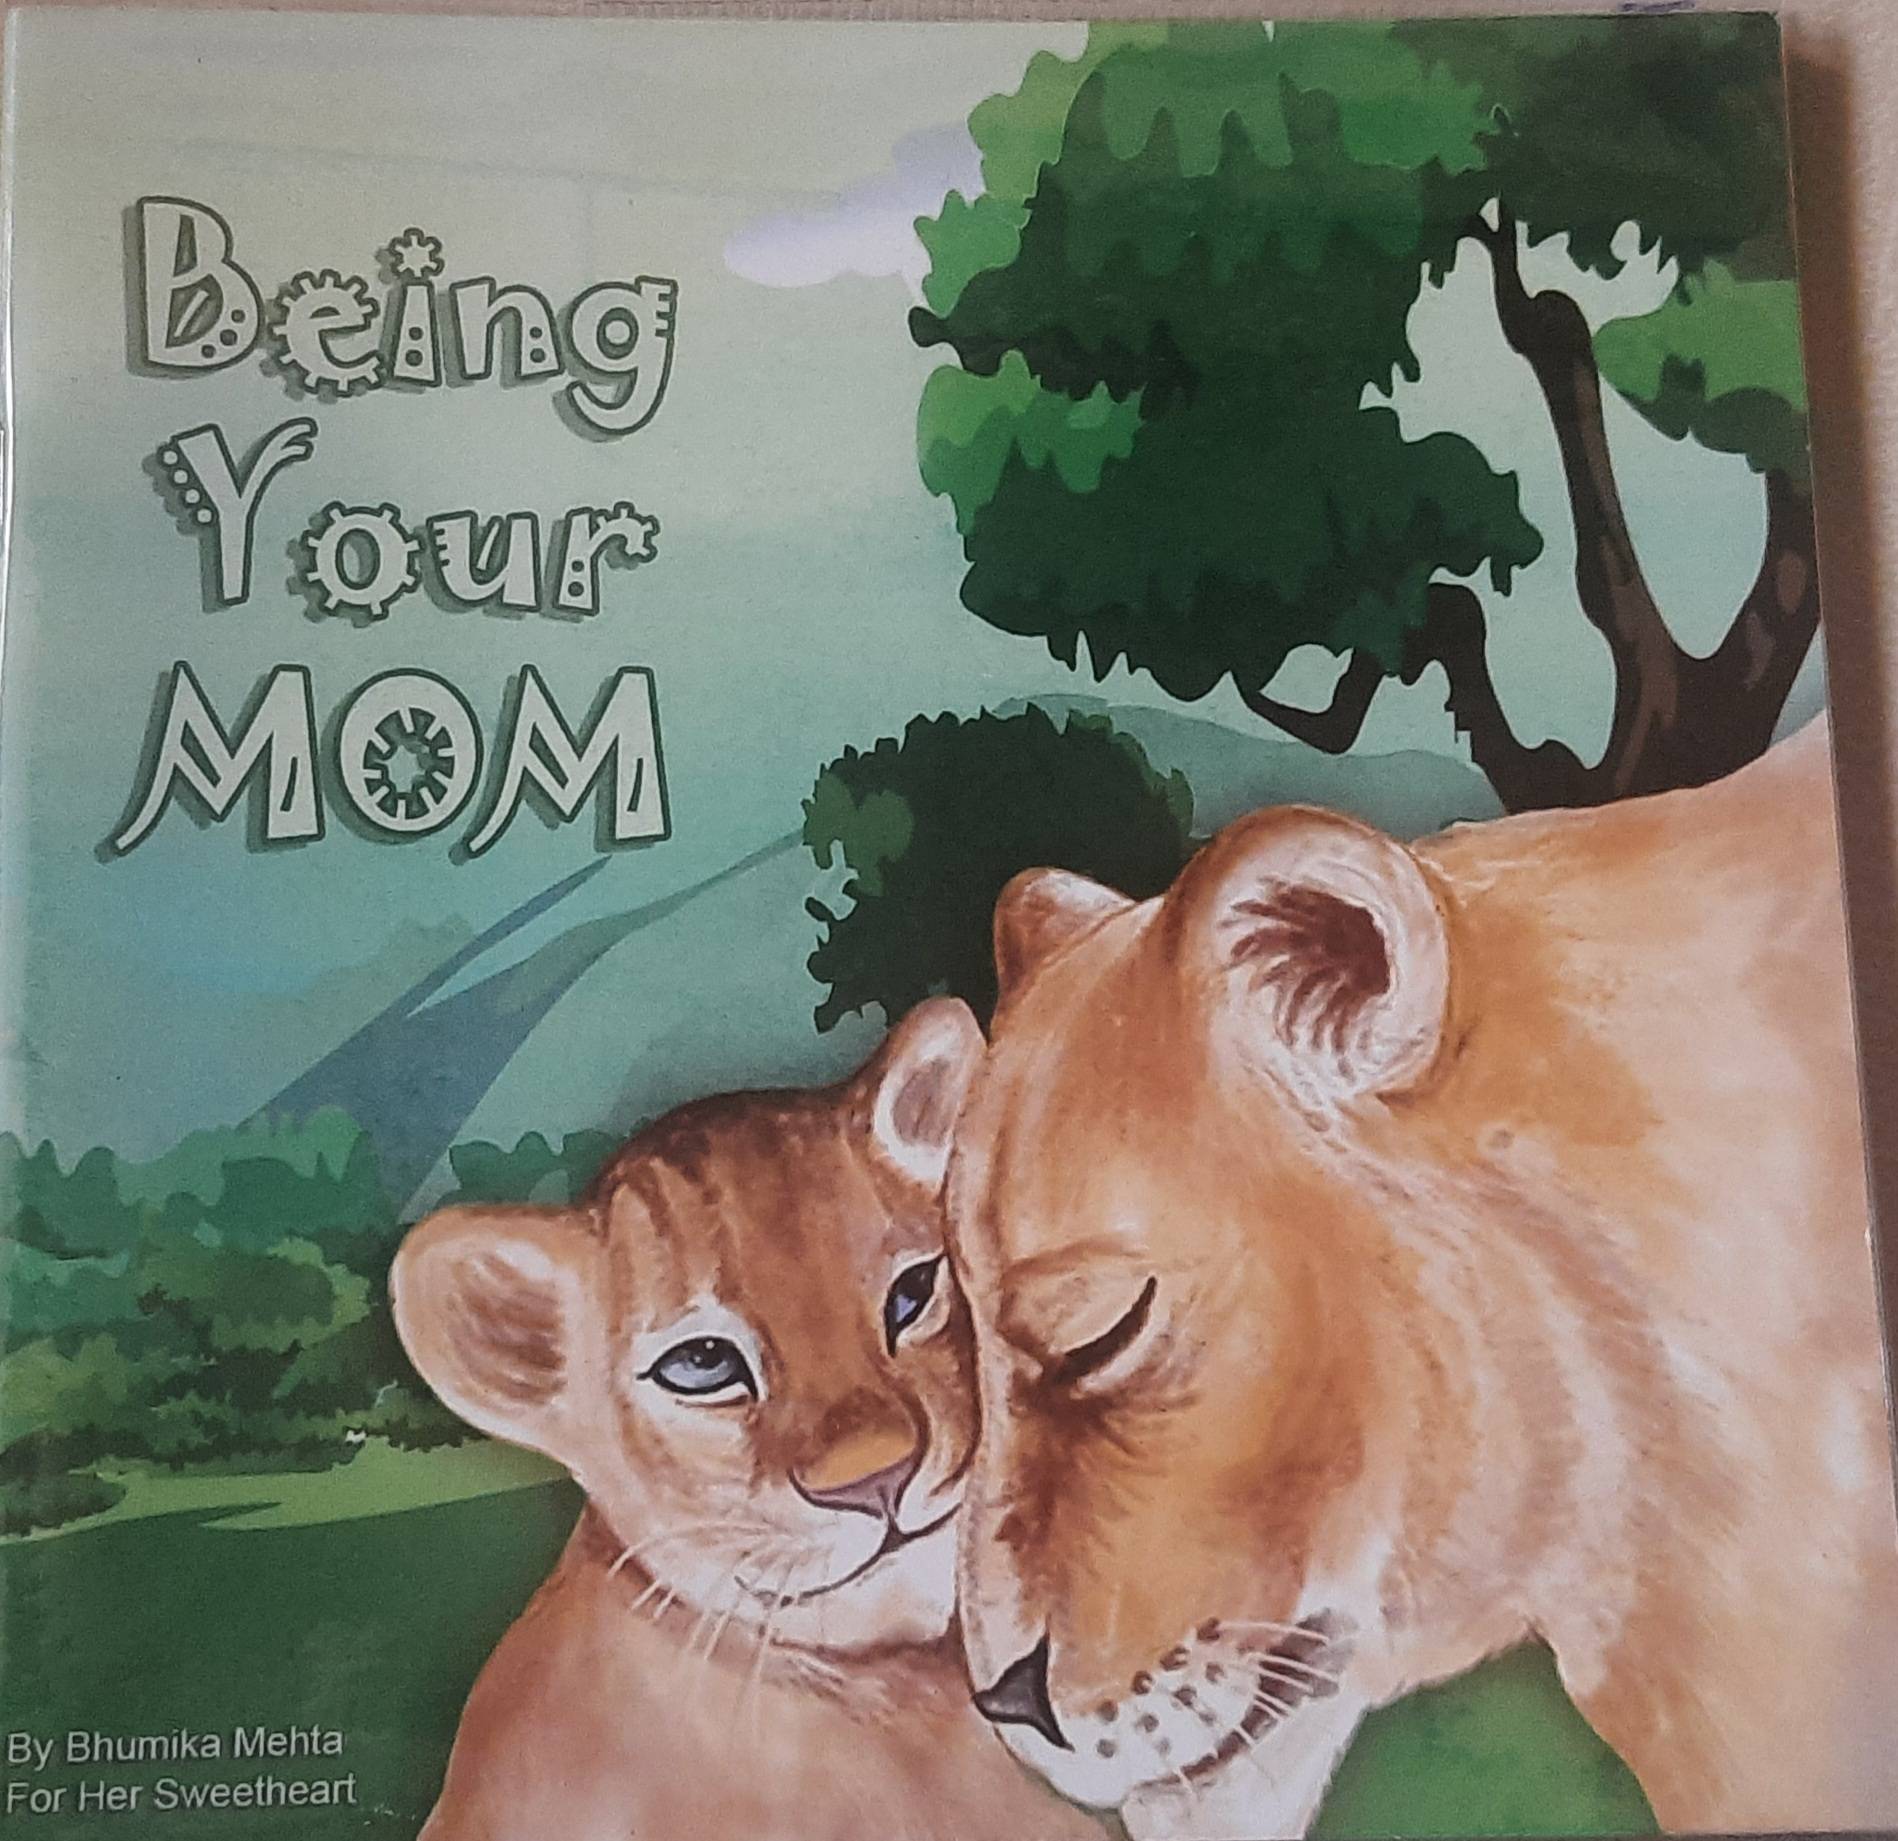 IMG : Being your Mom